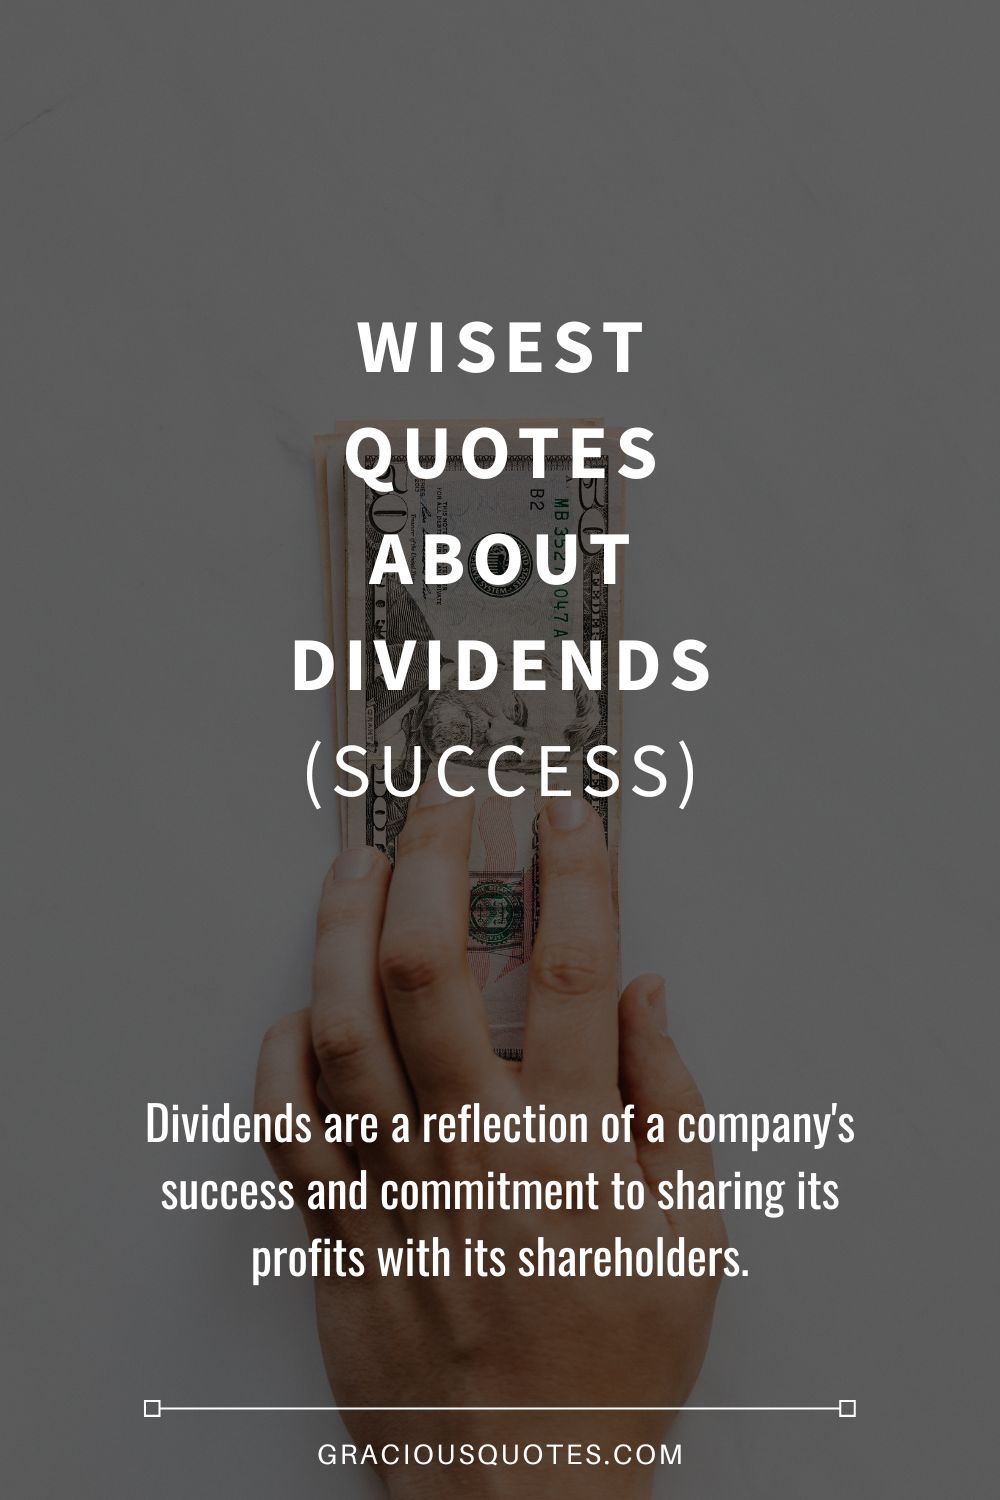 Wisest Quotes About Dividends (SUCCESS) - Gracious Quotes